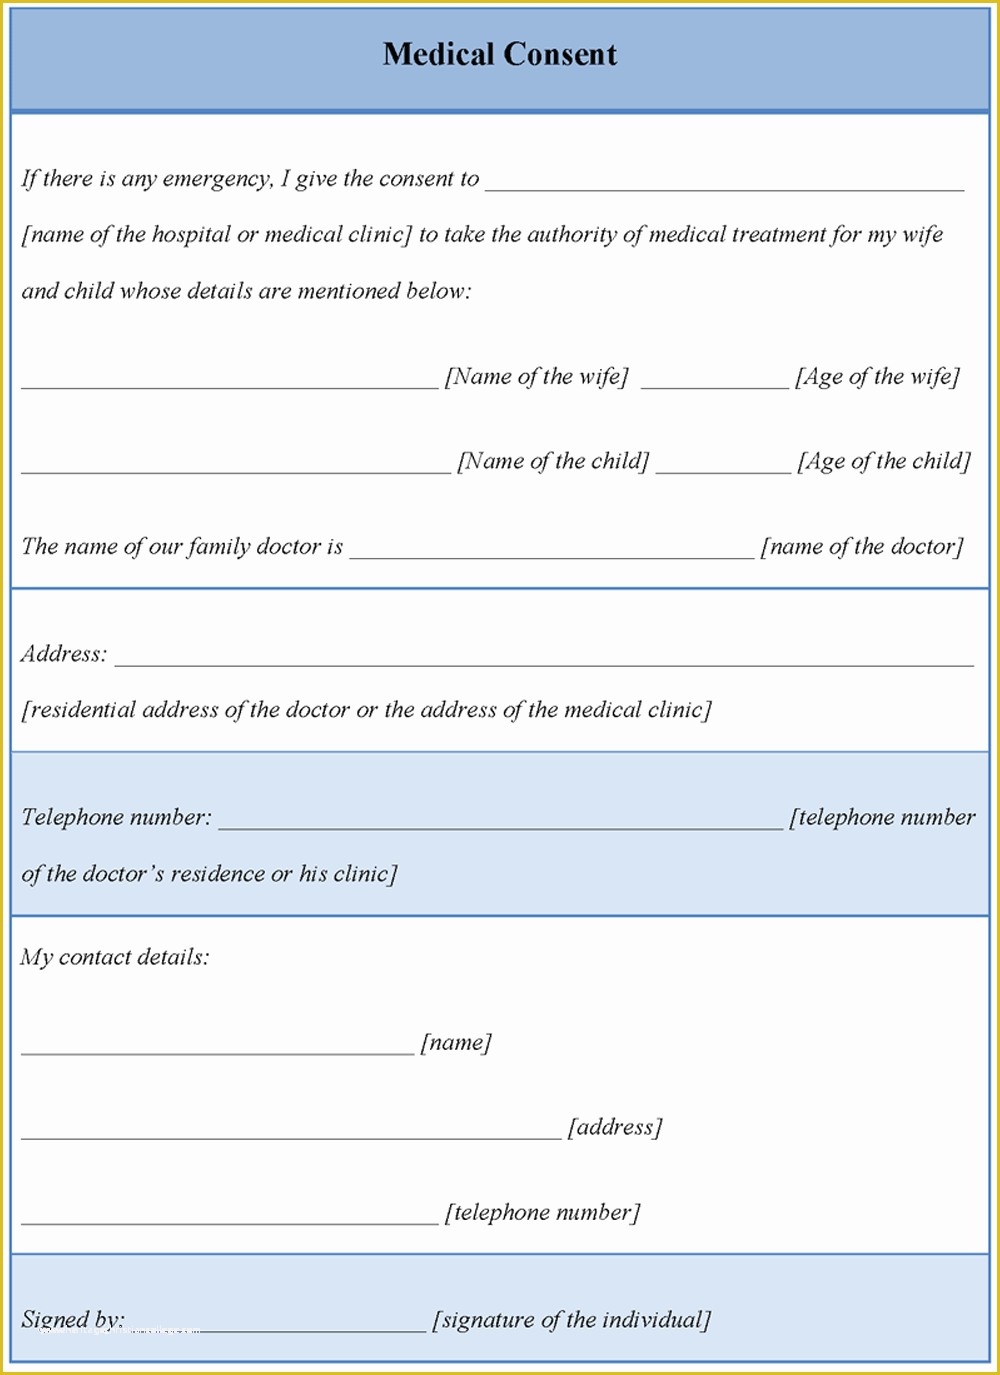 Free Medical Consent form Template Of Medical Template for Consent form Example Of Medical